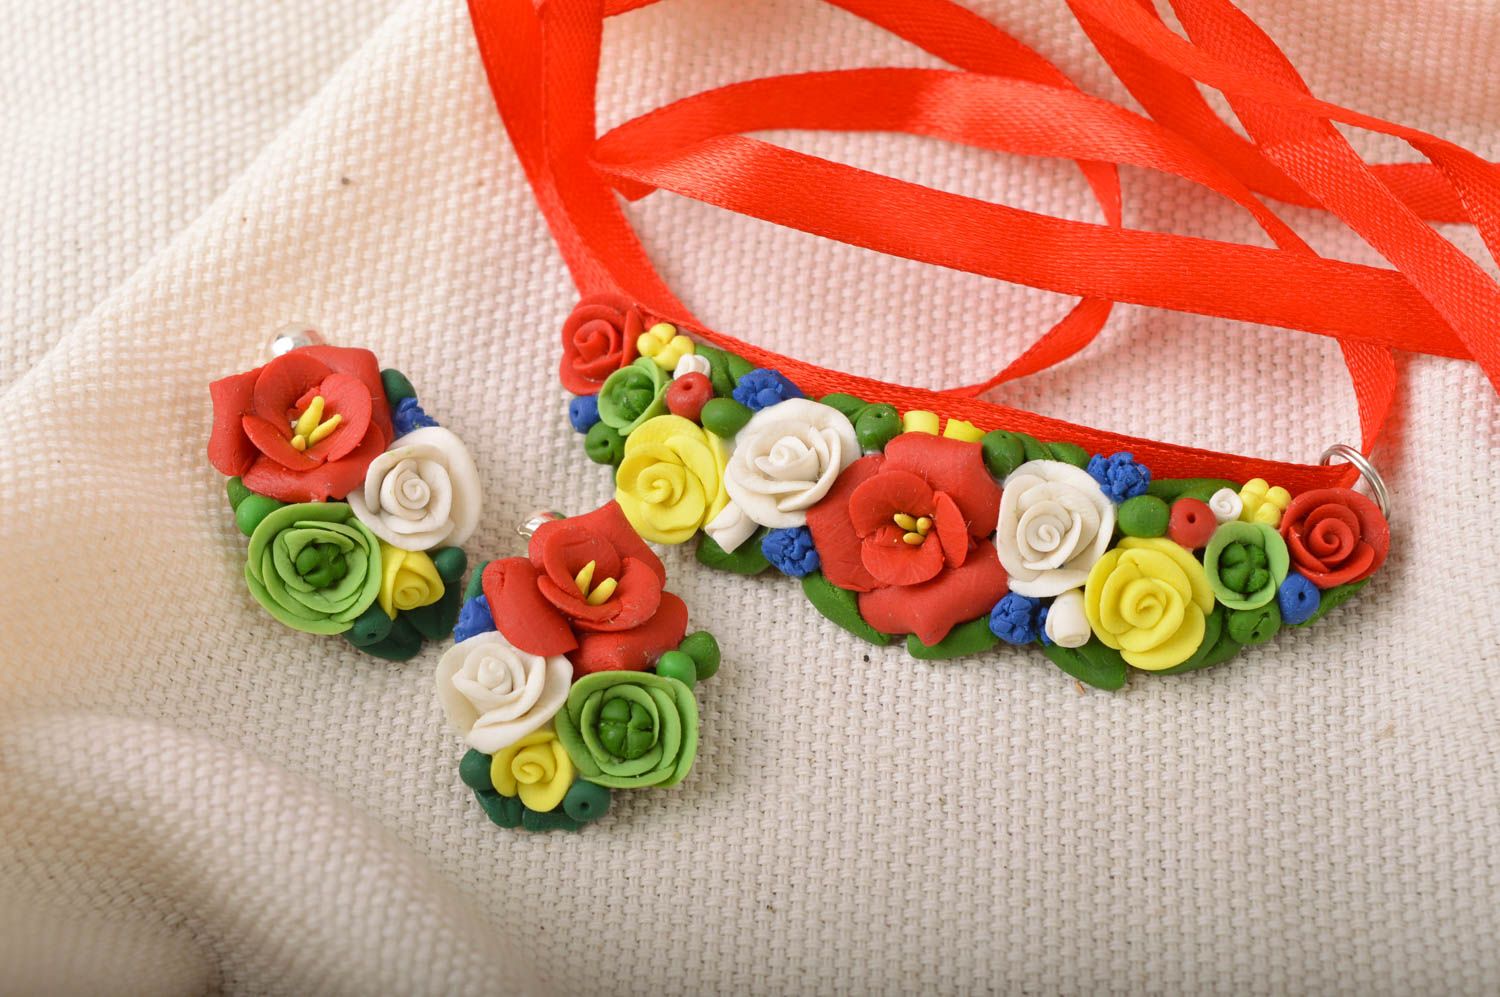 Handmade colorful floral cold porcelain jewelry set earrings and necklace photo 1